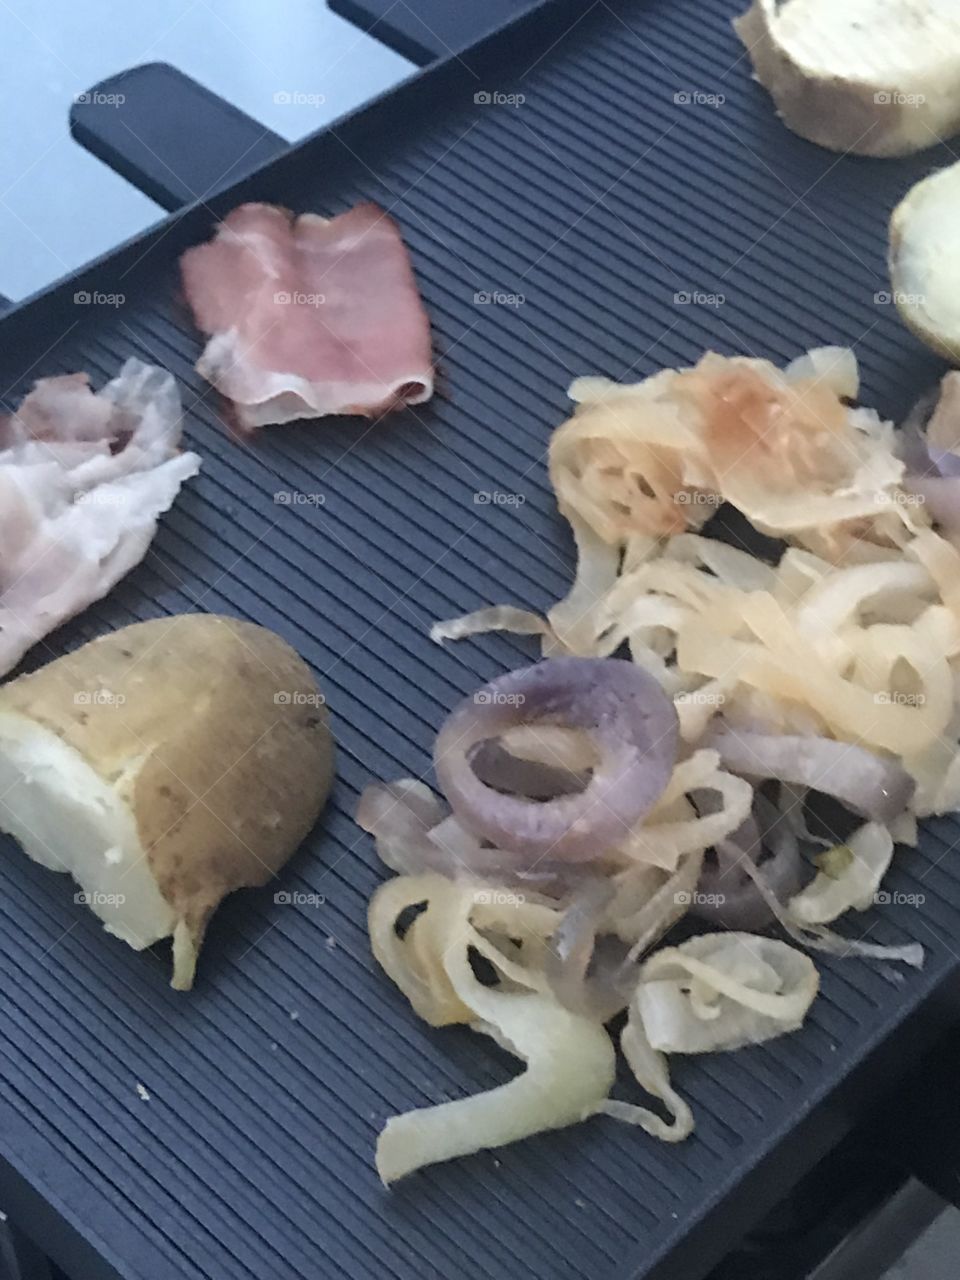 Racclette, cheese, melted, Switzerland, capers, prosciutto, French, feast, good eating, gourmet, delicious, racclette grill, Crusty bread, sweet pickles and meats, anti-pasta, Grilled onions, potatoes, pork, Backyard, friends, gathering, culinary